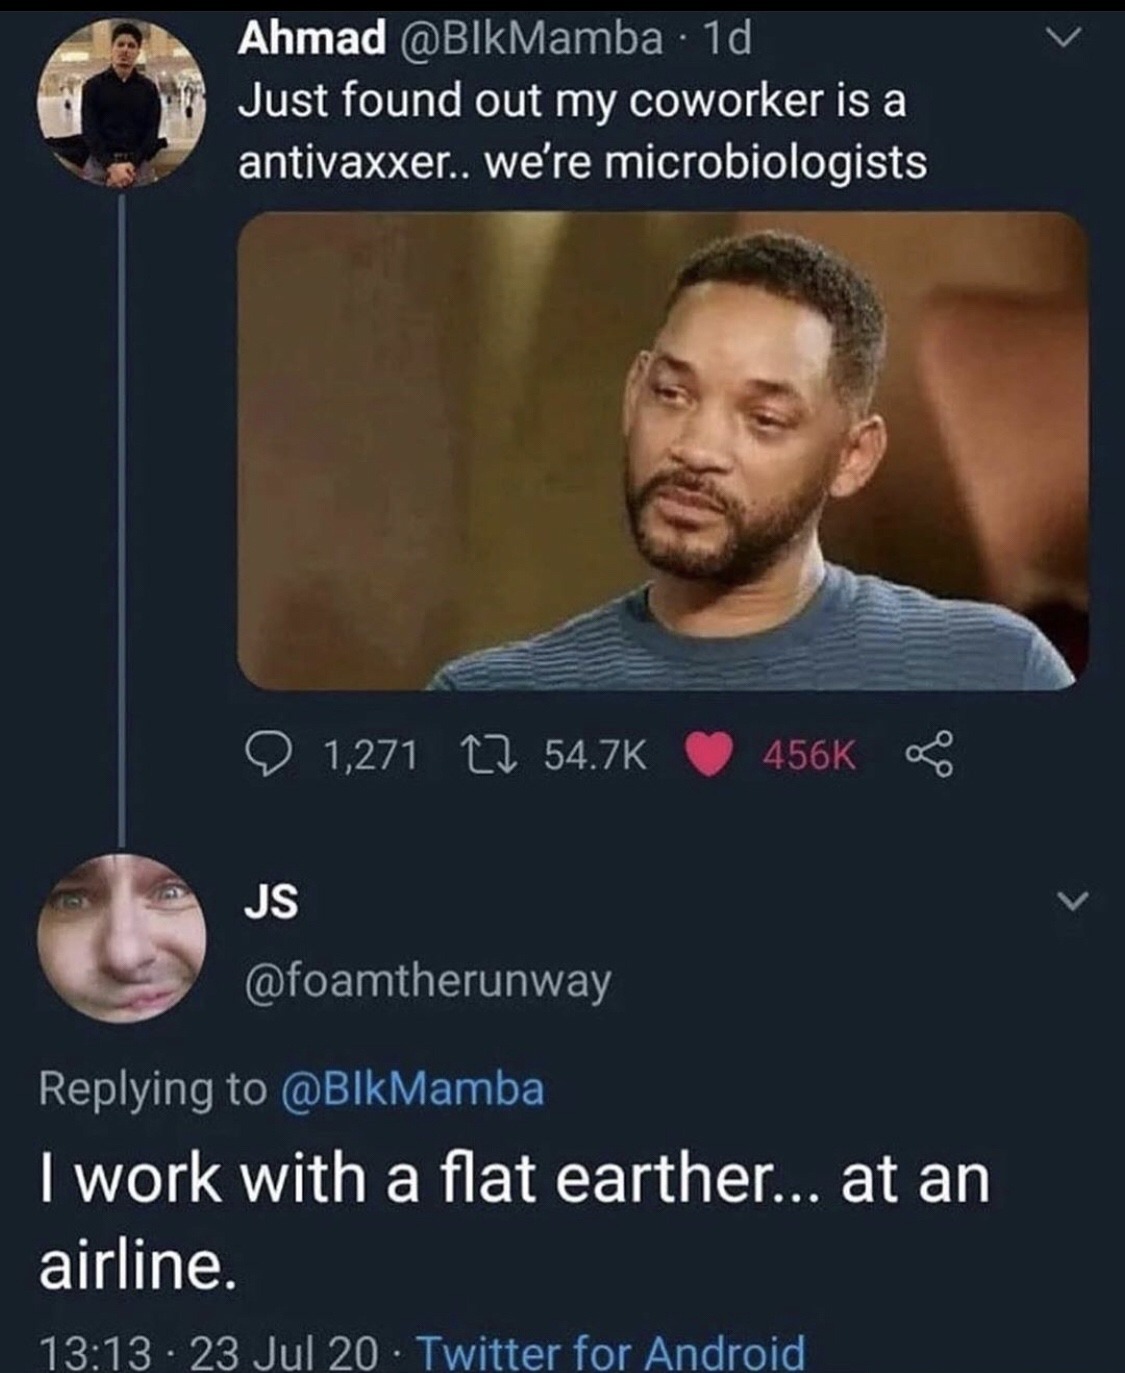 photo caption - Ahmad 1d Just found out my coworker is a antivaxxer.. we're microbiologists 1,271 17 Js I work with a flat earther... at an airline. 23 Jul 20 Twitter for Android